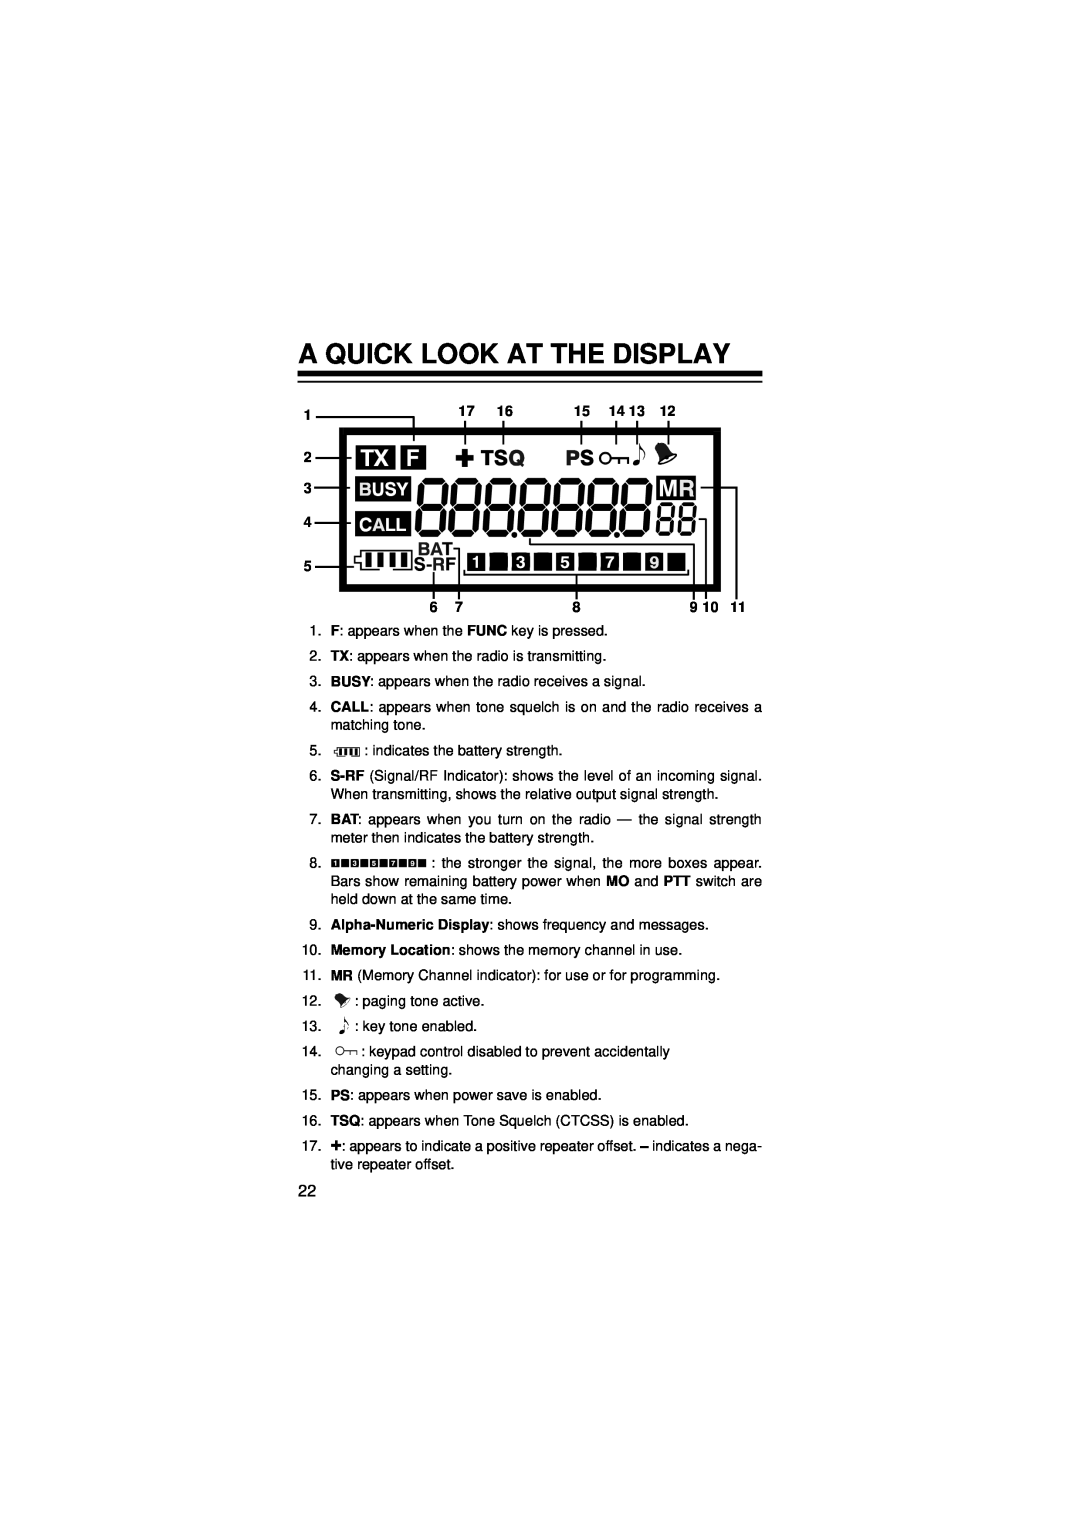 Radio Shack HTX-400 owner manual A Quick Look At The Display 